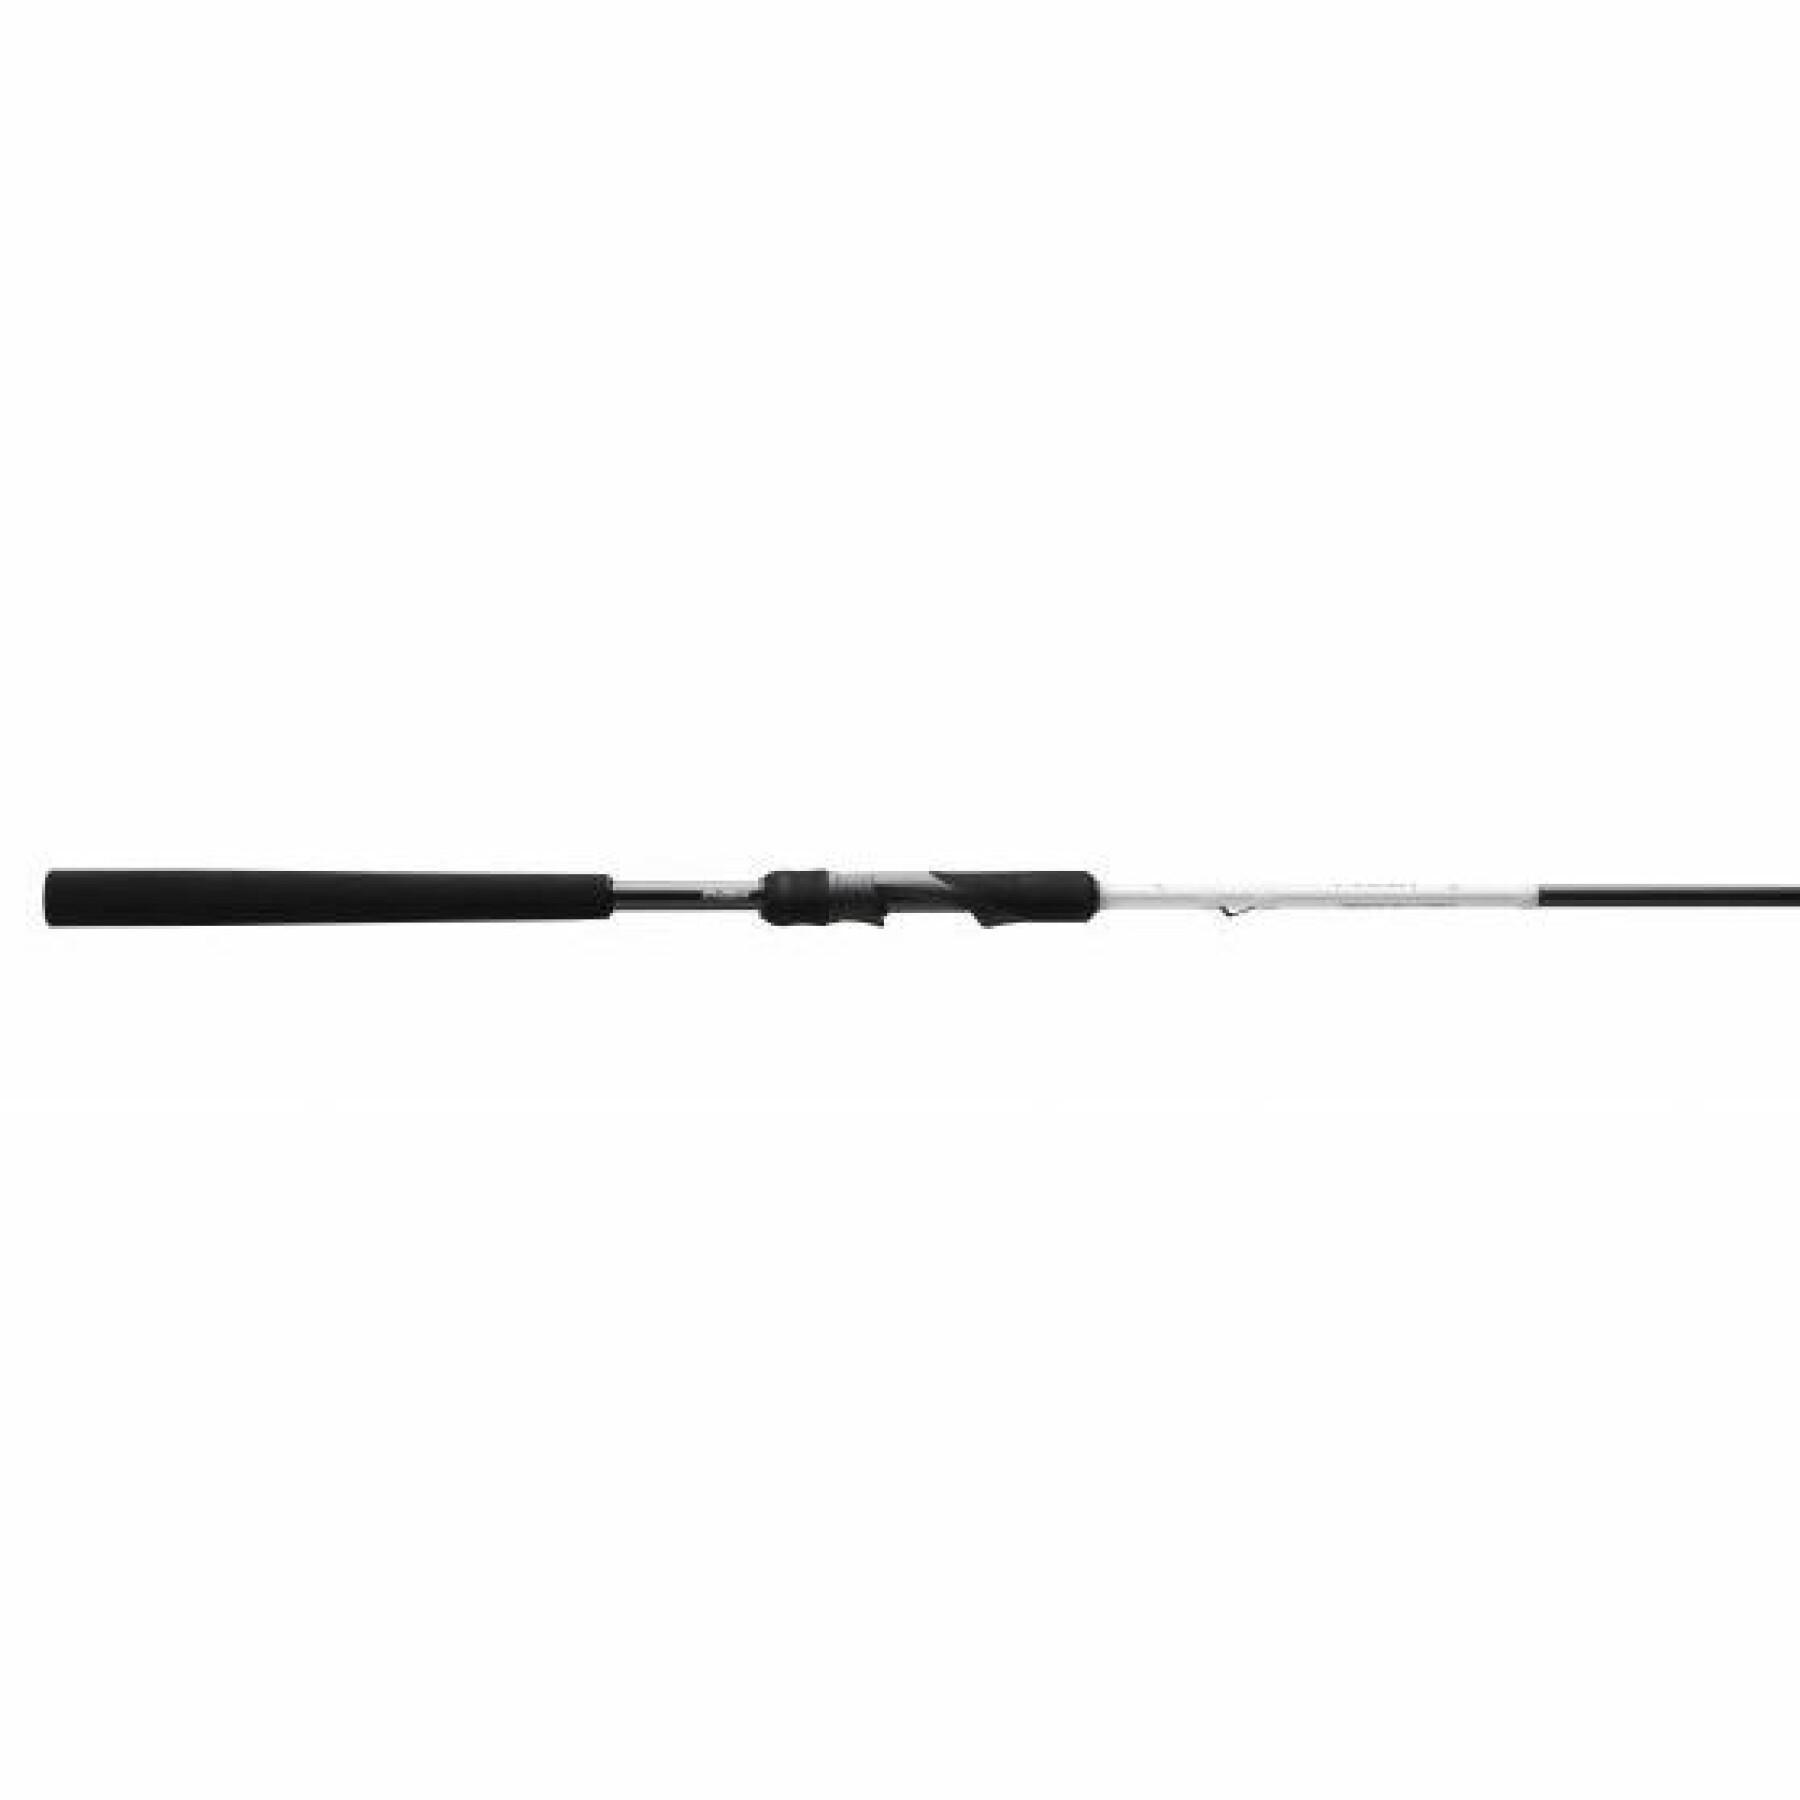 Cane 13 Fishing Rely S Spin 2,69m 10-30g